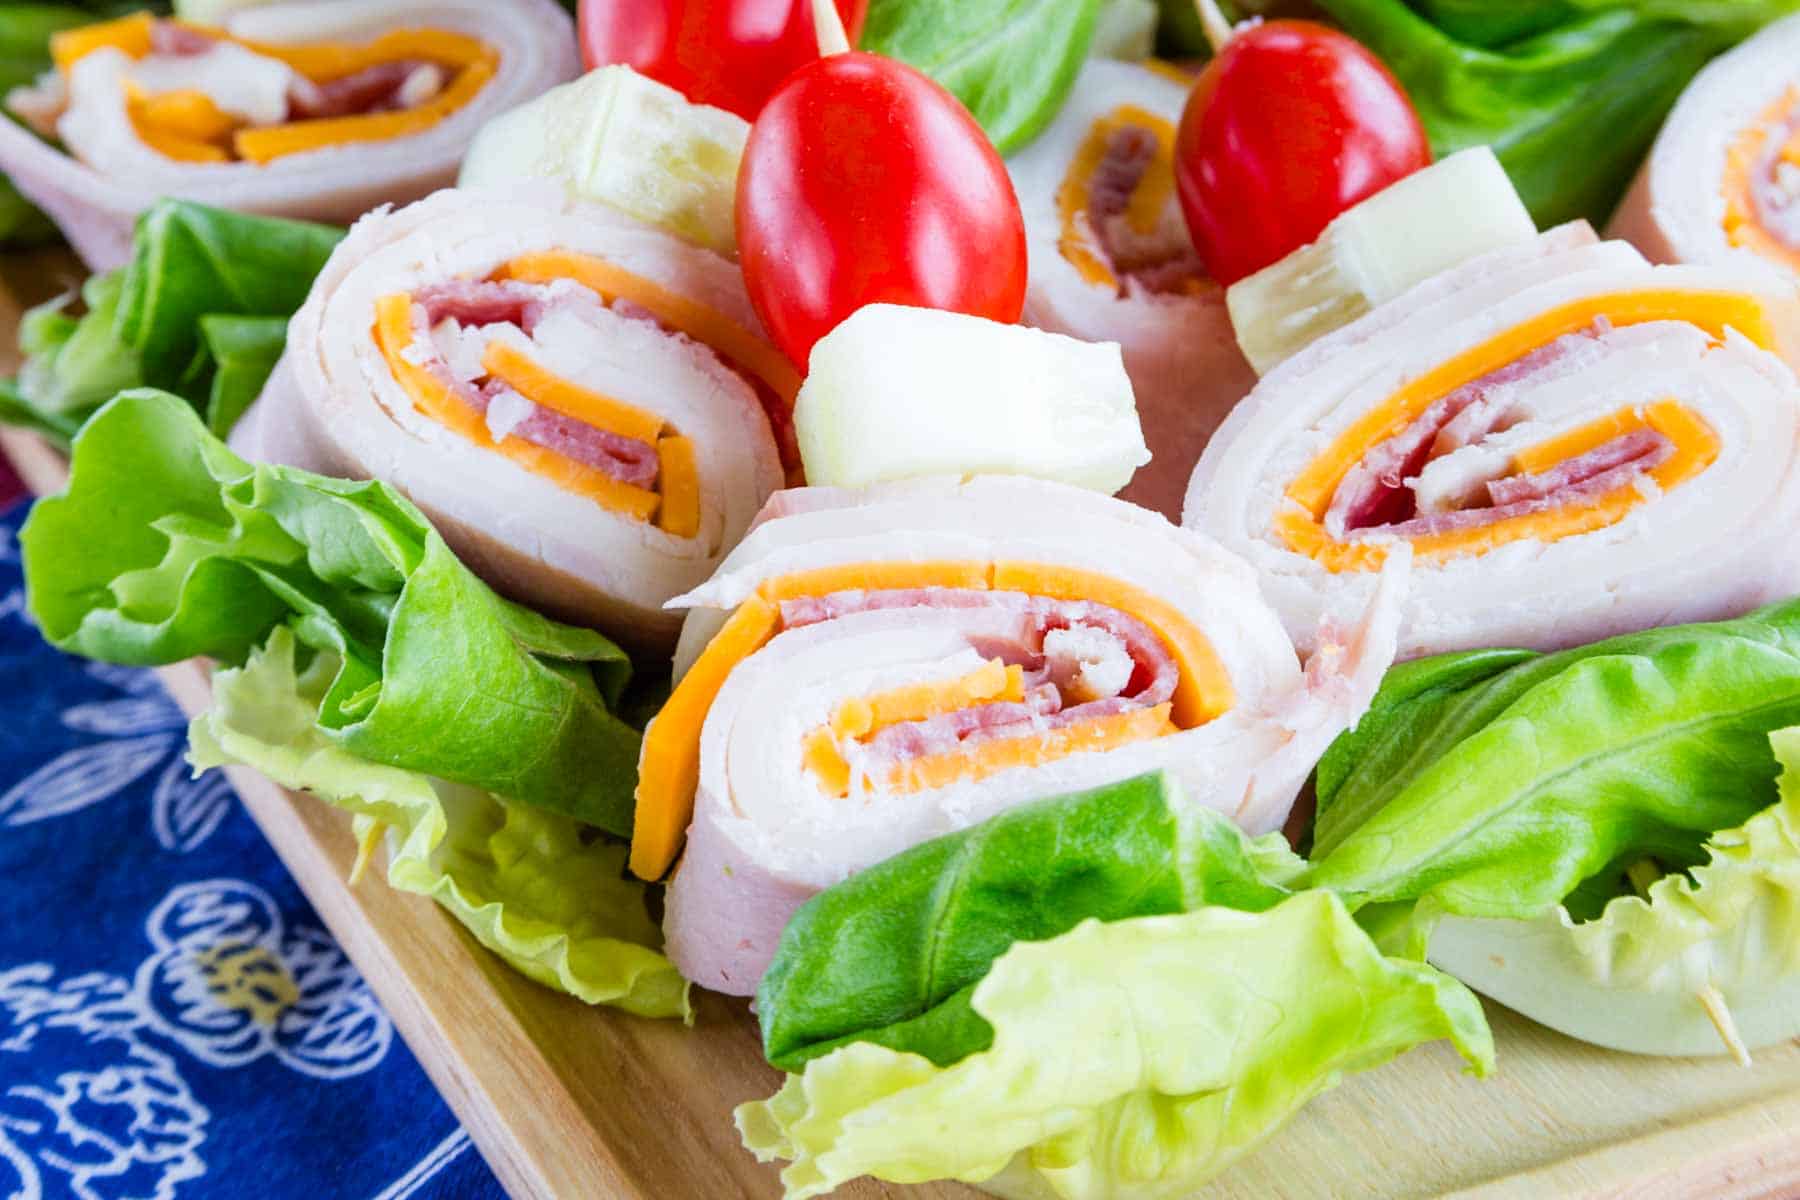 Rolls of deli meats and cheese threaded onto toothpick with lettuce, cucumber and tomato on a wooden platter.